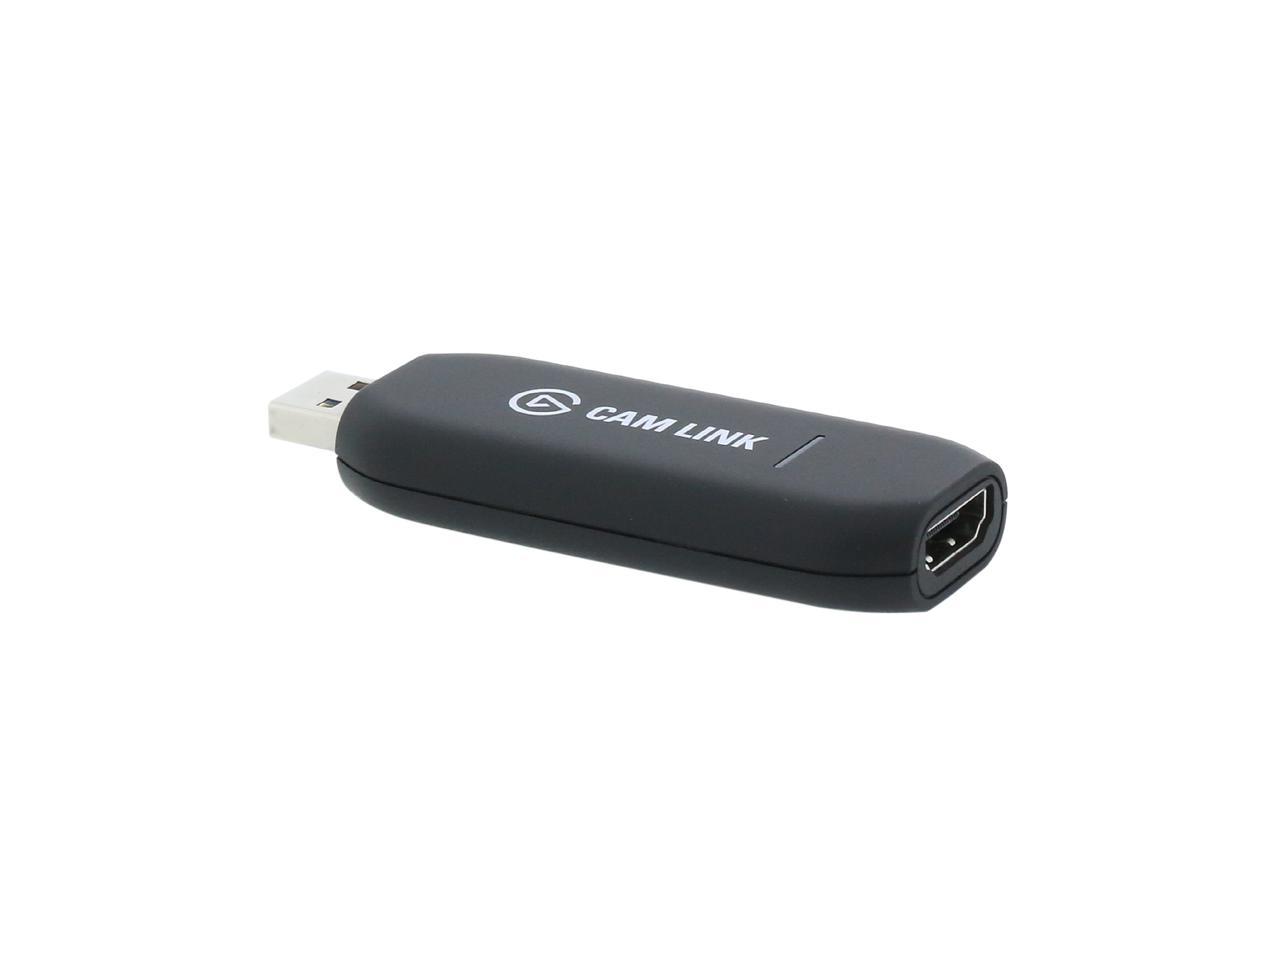 Open Box Elgato Cam Link Broadcast Live And Record Via Dslr Camcorder Or Action Cam In 1080p 60 Fps Compact Hdmi Capture Device Usb 3 0 Newegg Com